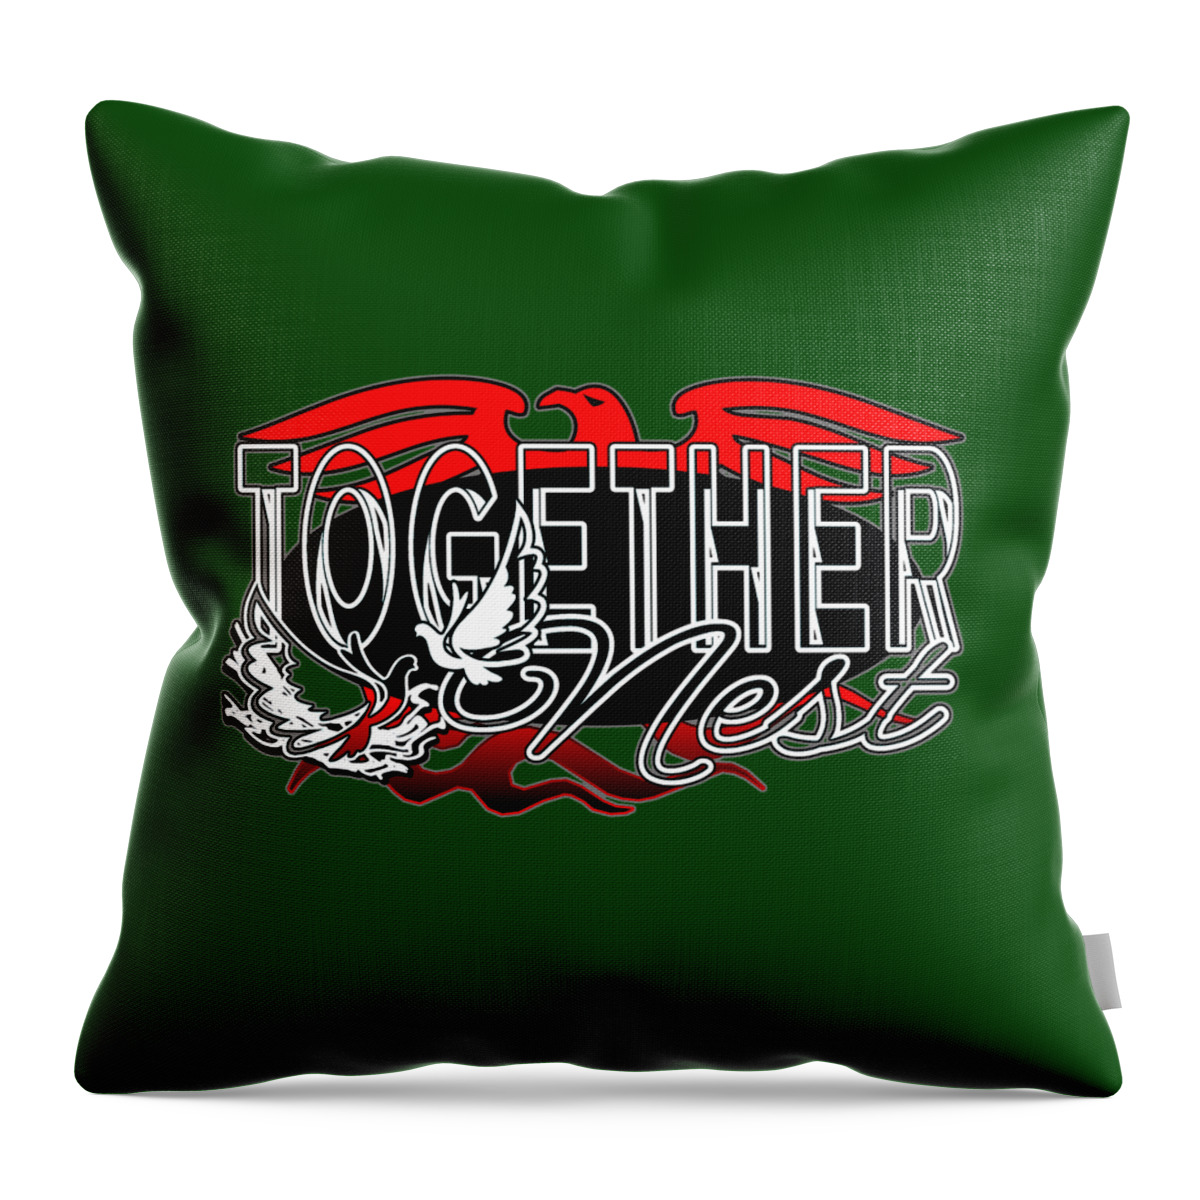 Couples Throw Pillow featuring the digital art Together Nest a Couple Date Night. Emblem by Delynn Addams